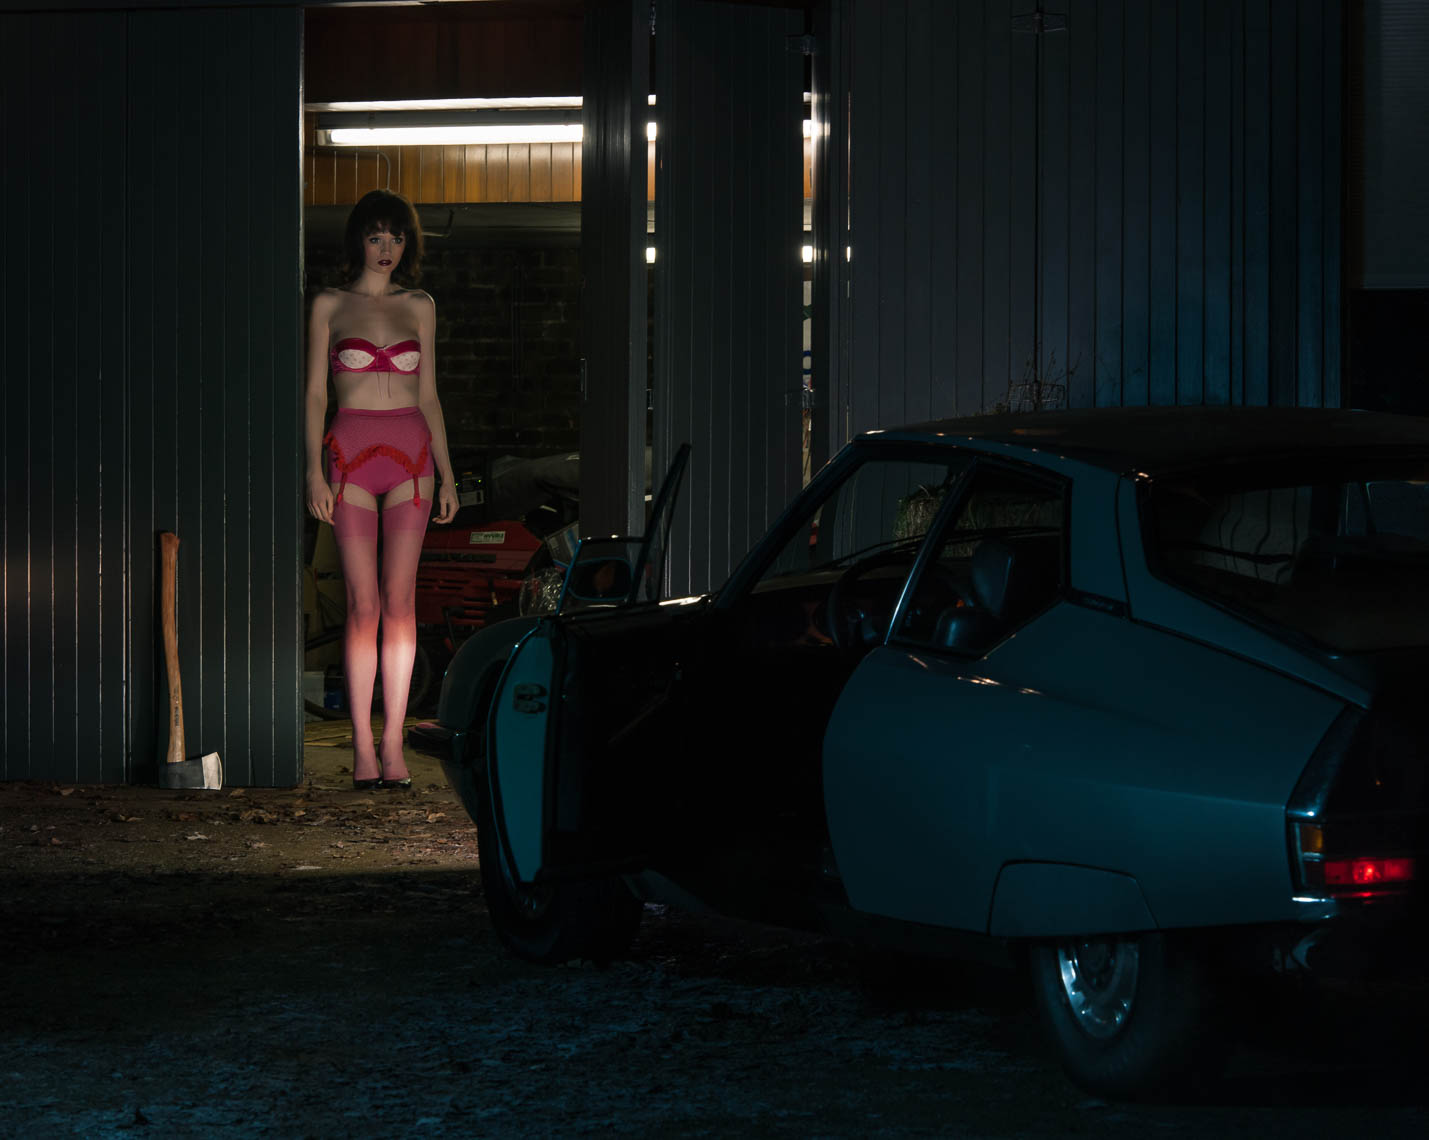 fashion model standing by a car dressed in lingerie photograph by marc rogoff